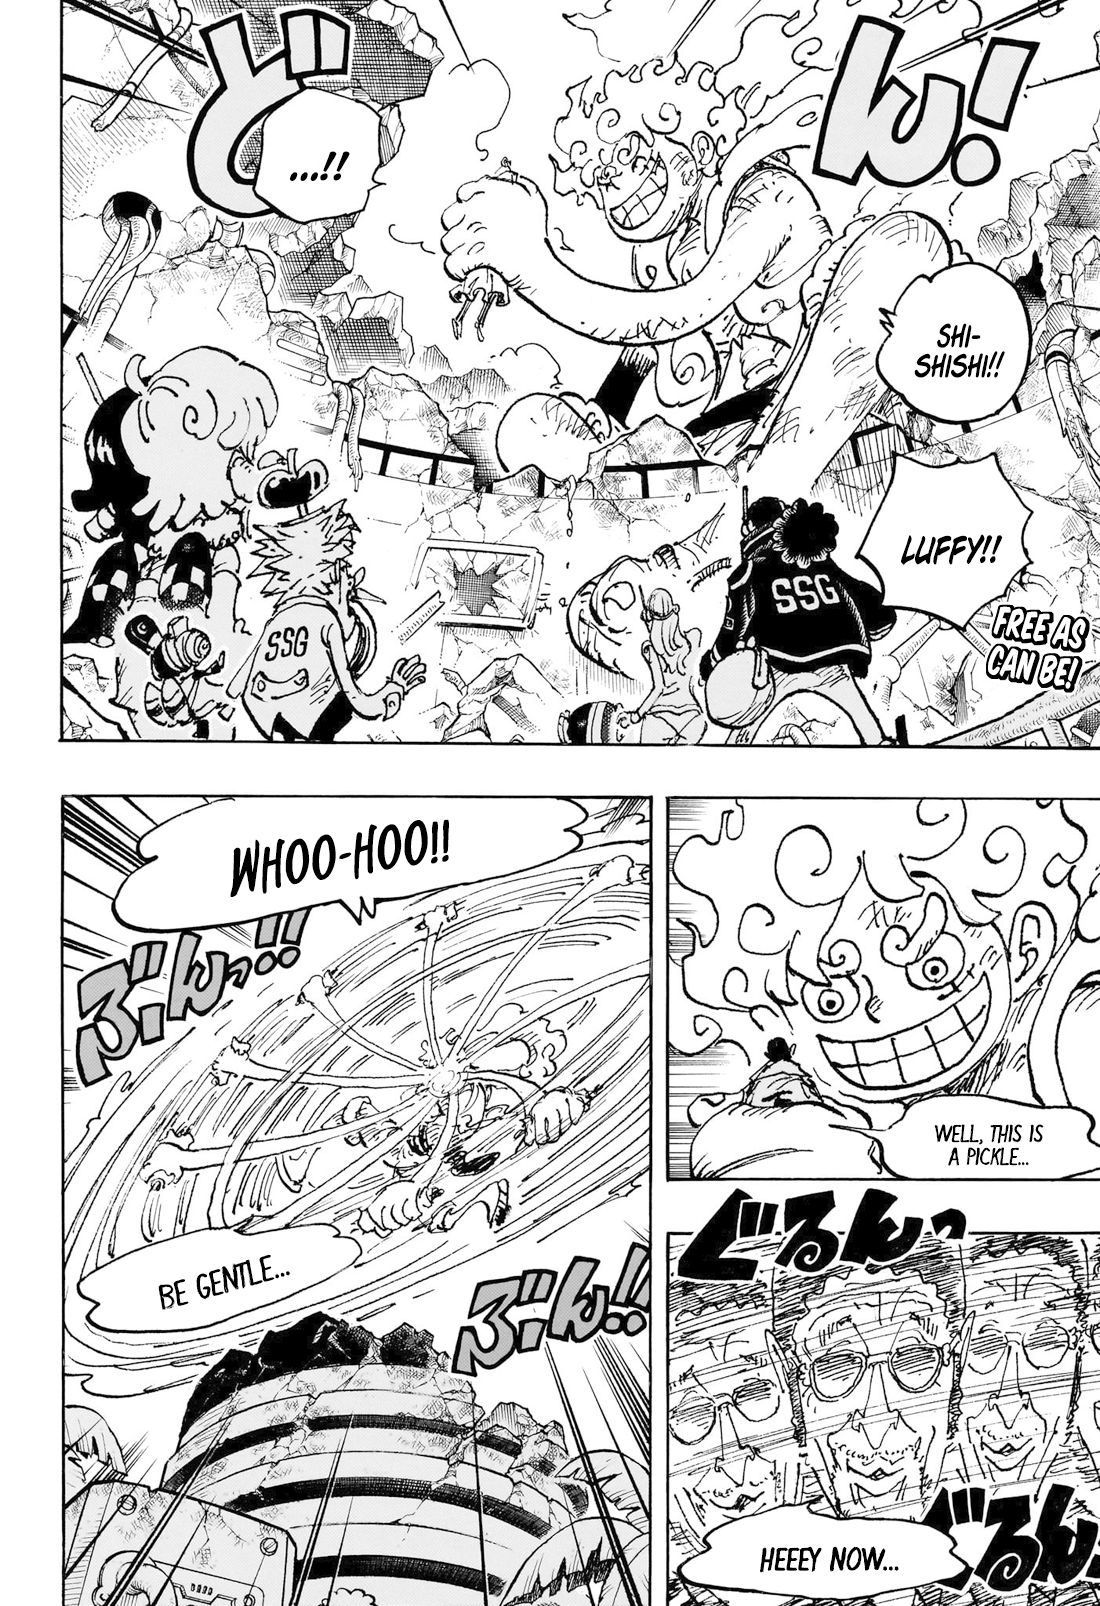 One Piece, Chapter 1070  TcbScans Org - Free Manga Online in High Quality